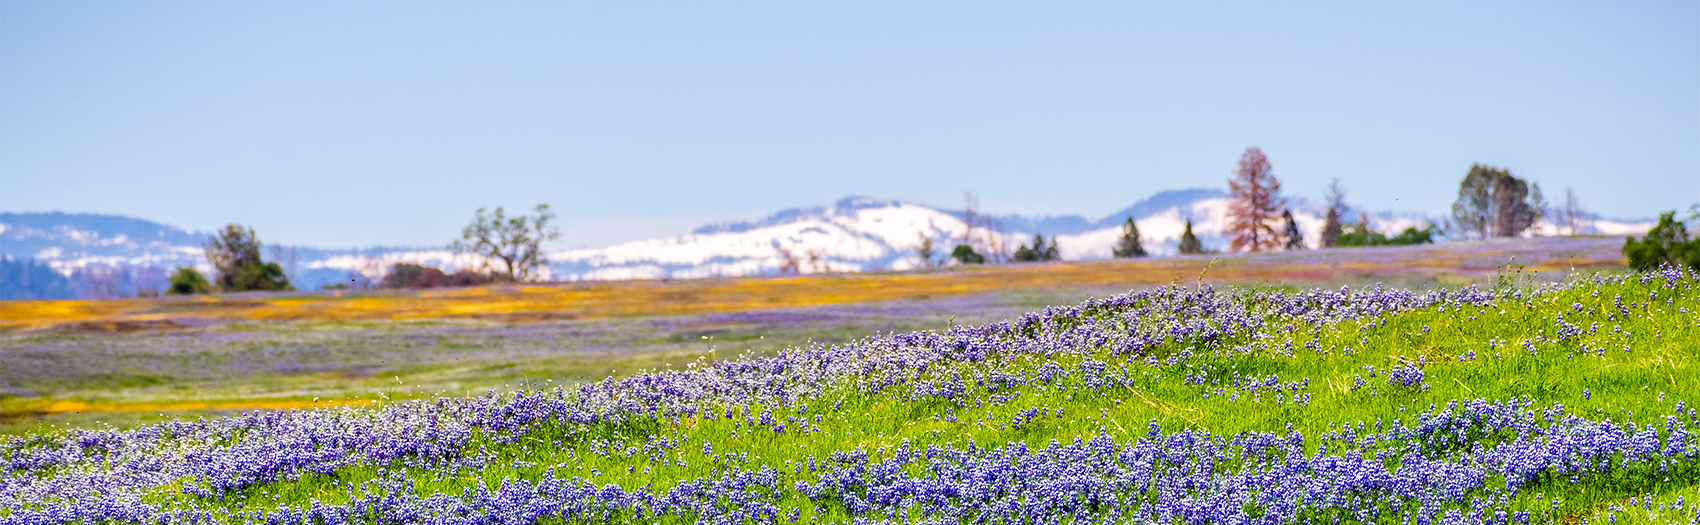 A field of purple flowers with snow capped mountains in the background